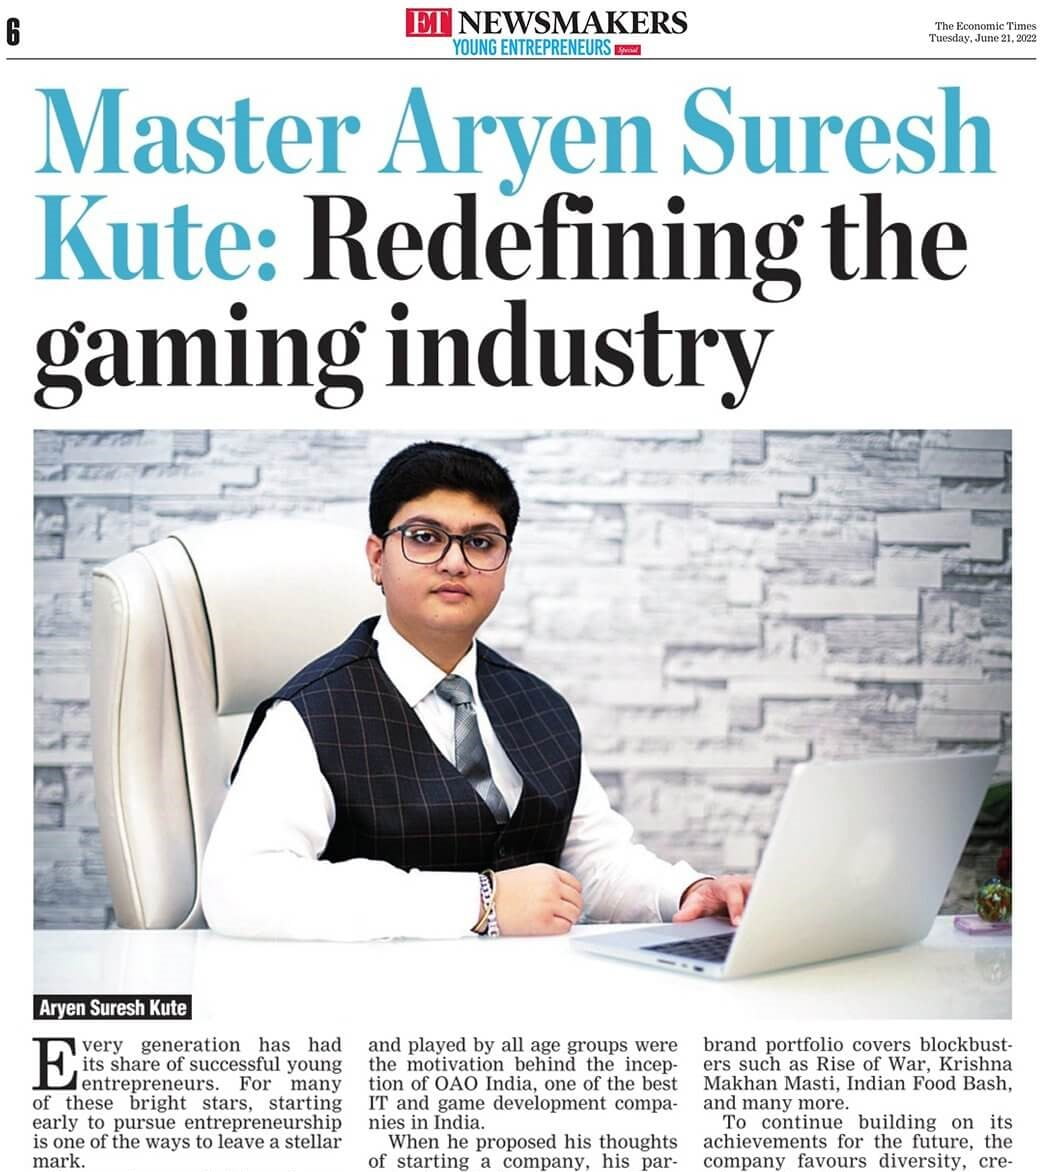 aryen kute featured in the economic times